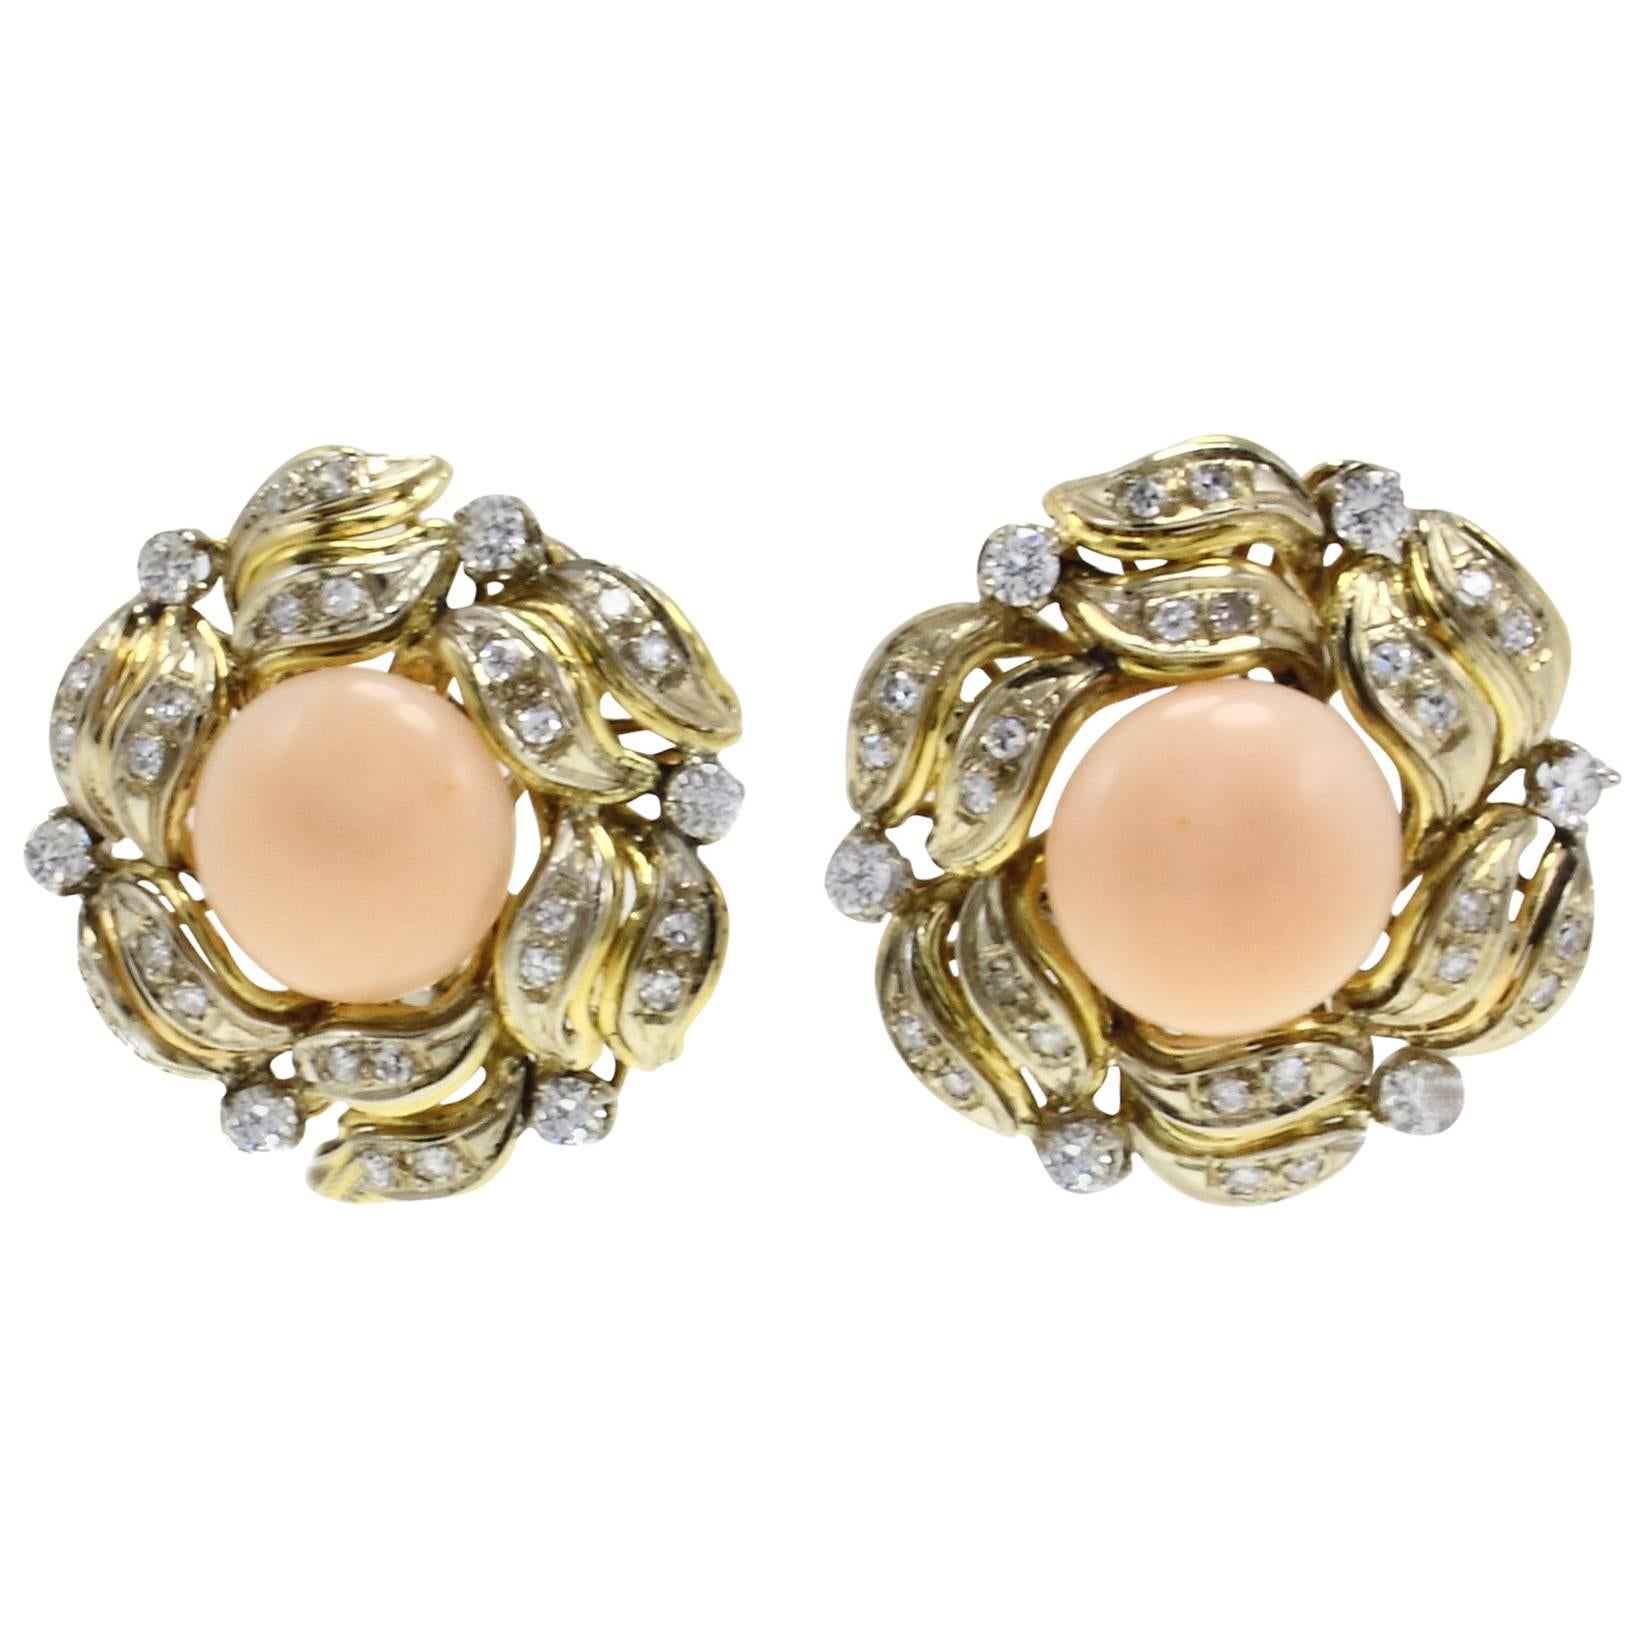 White Diamonds, Pink Coral Buttons, 18K Yellow Gold Clip-on Earrings